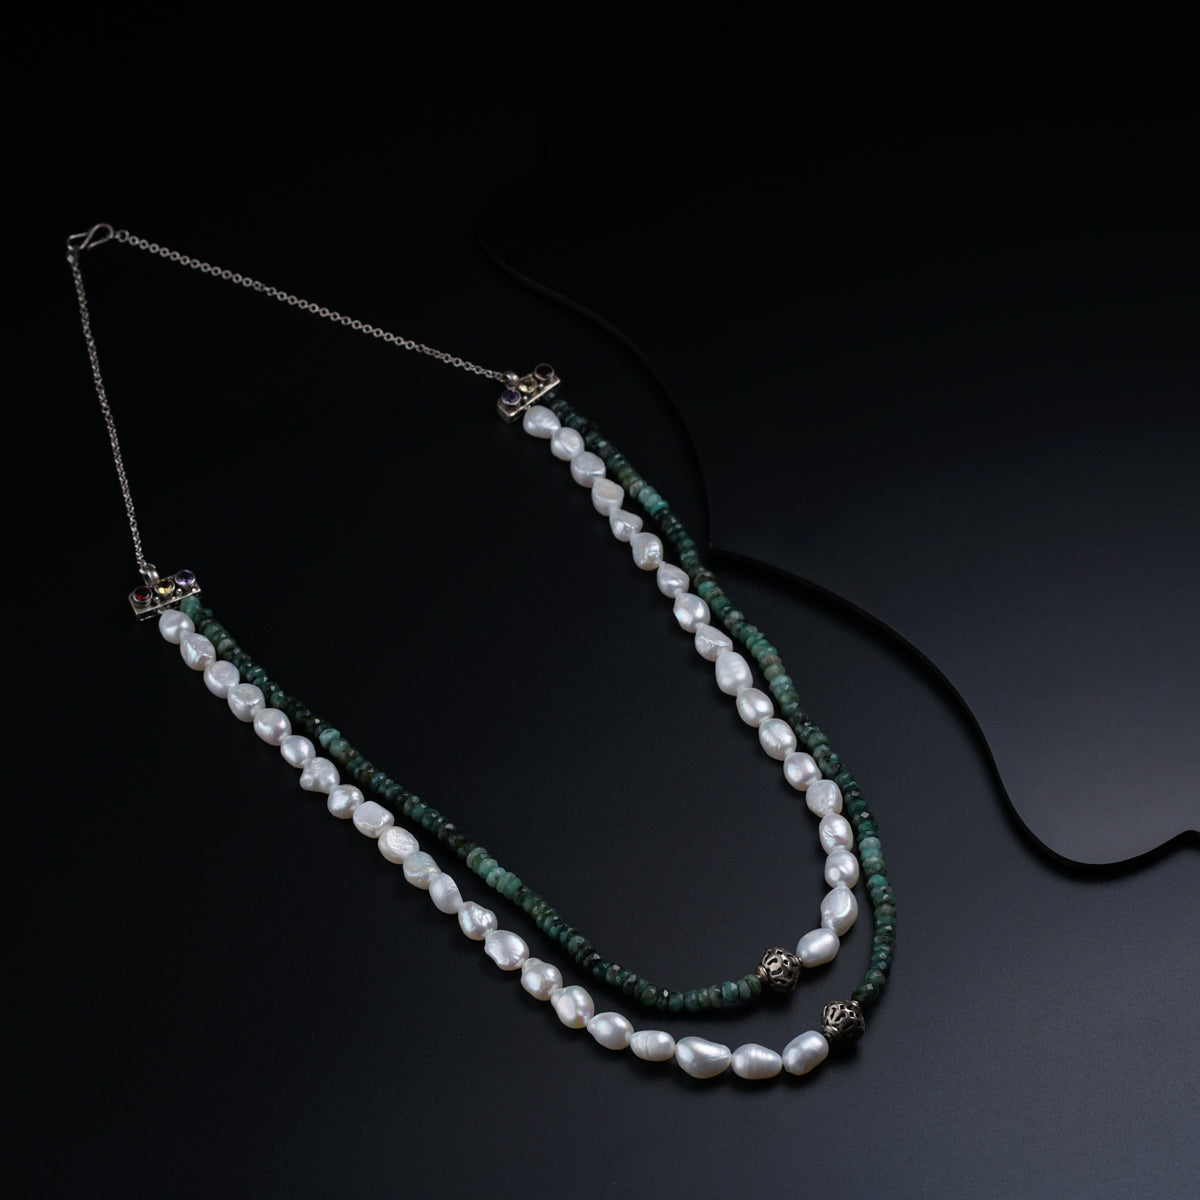 Silver Necklace with Green Rubys and Pearls